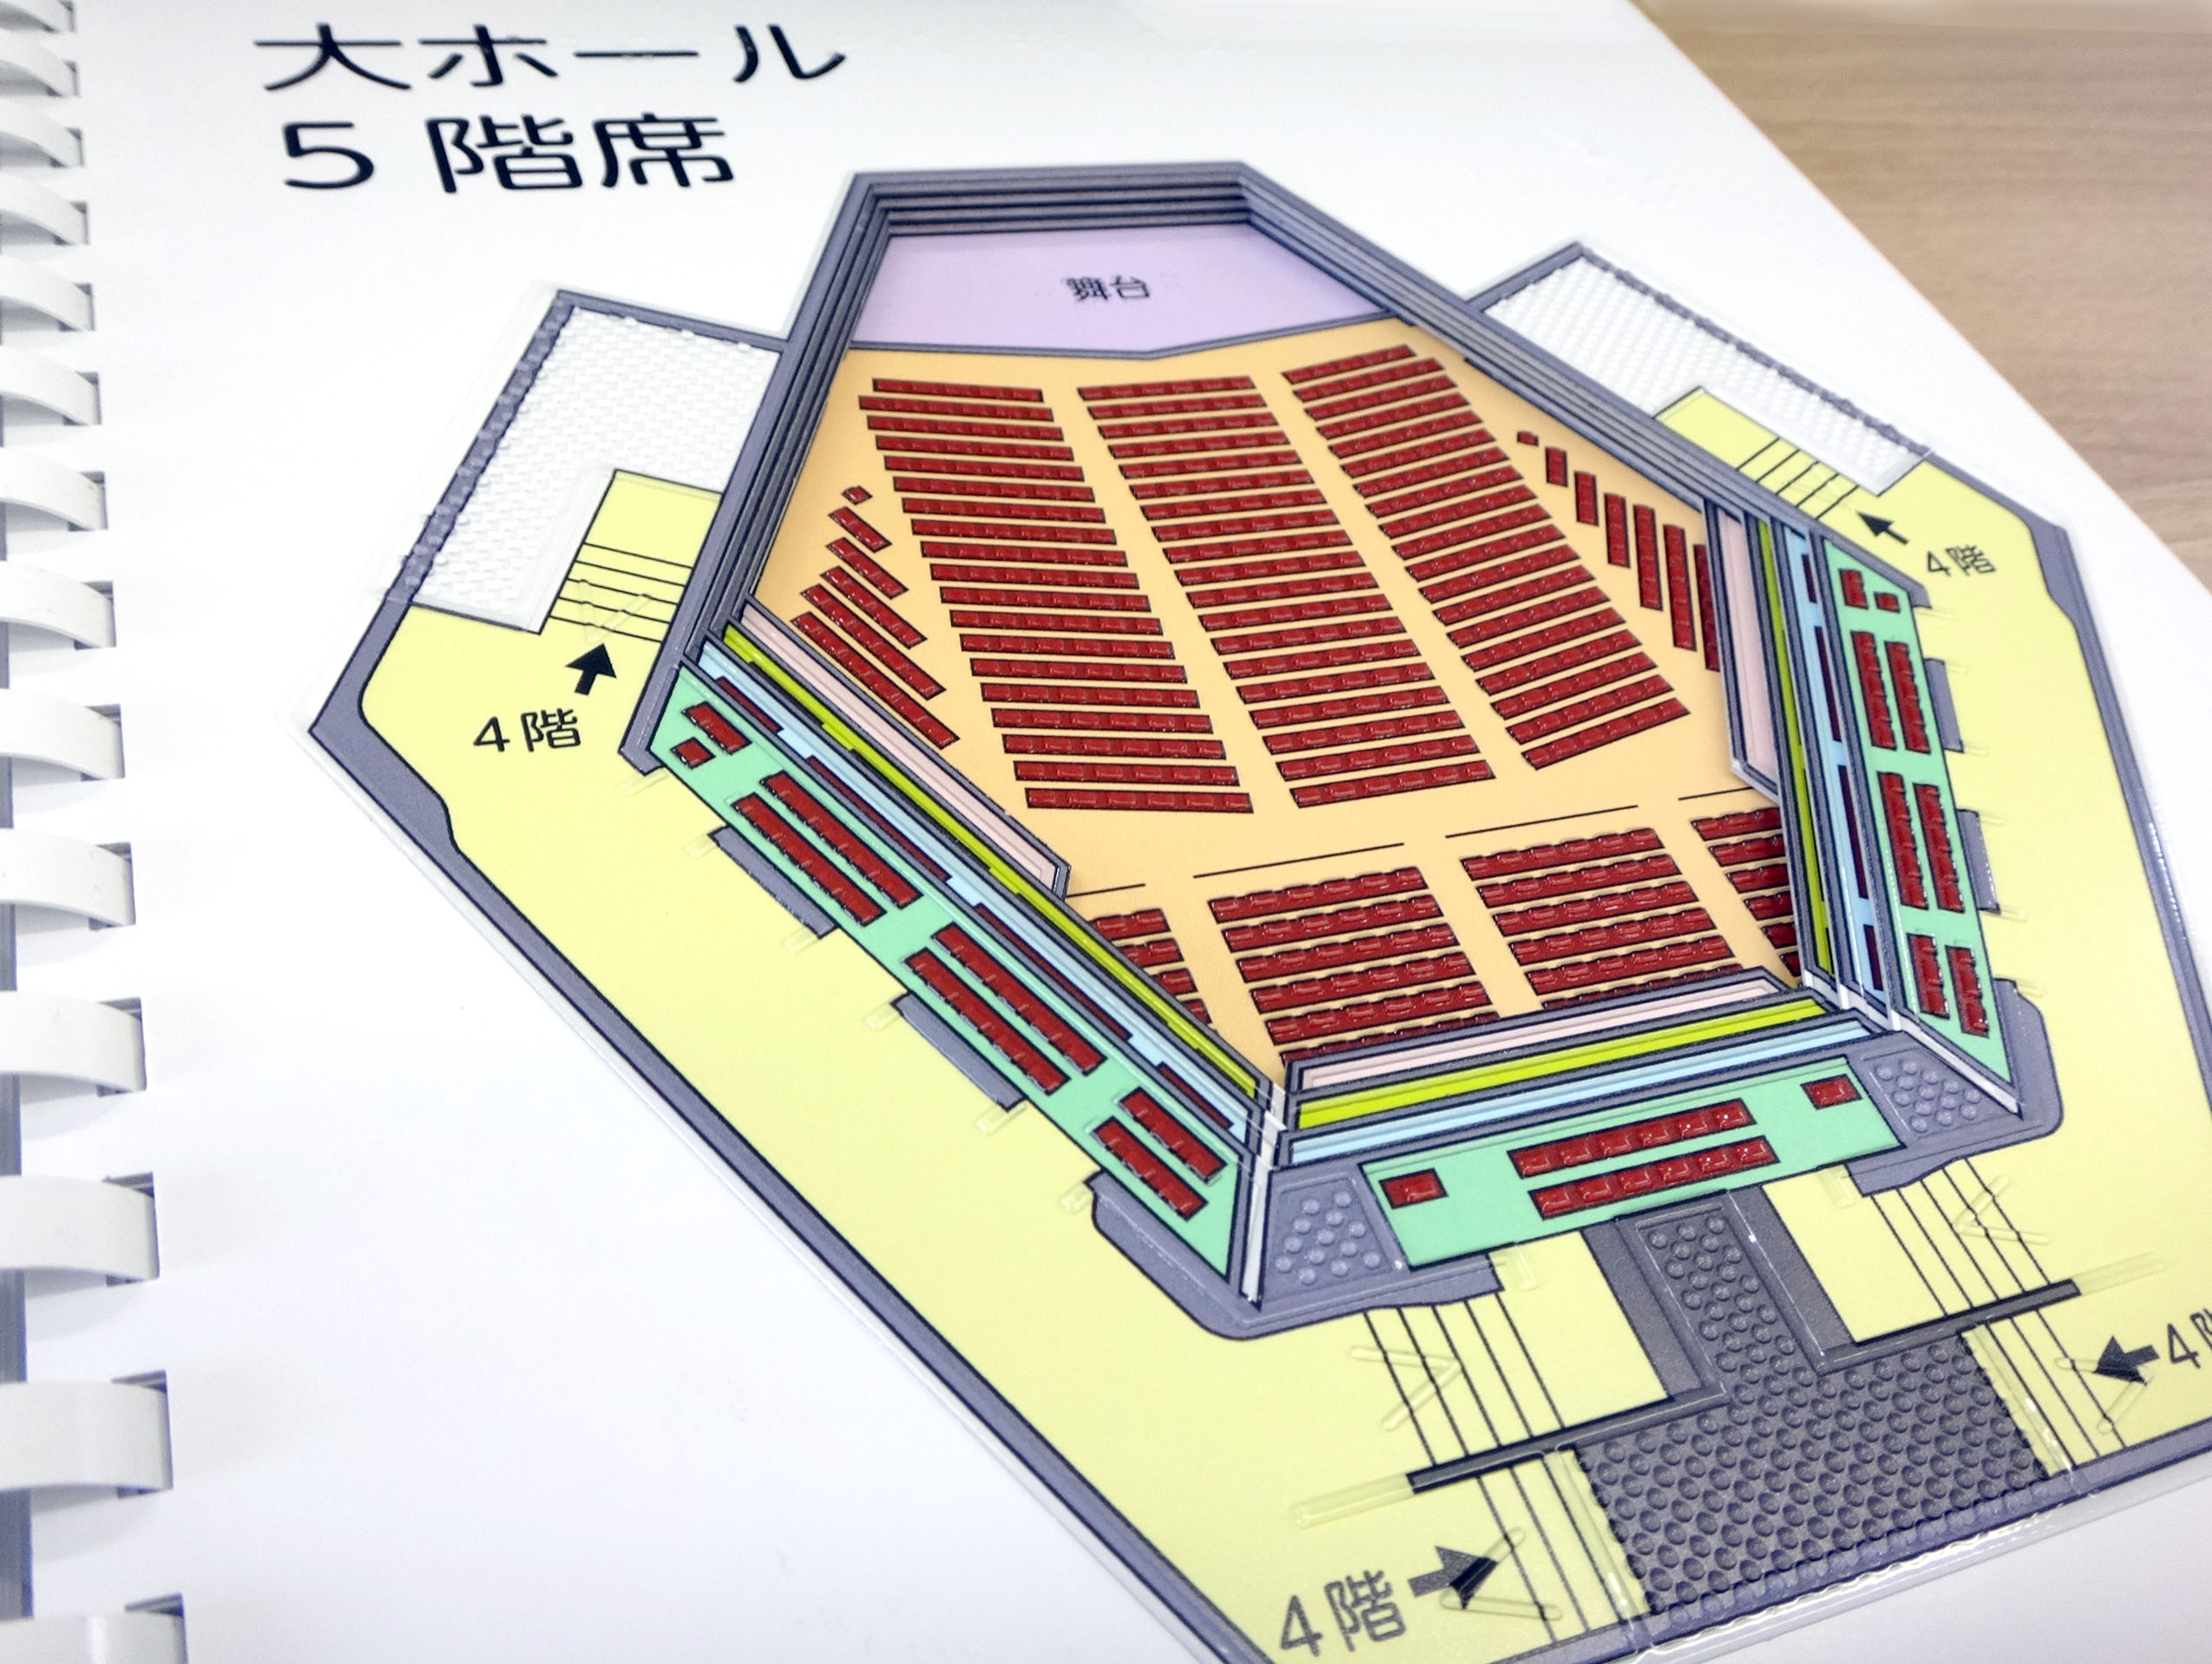 Tactile map of the main hall